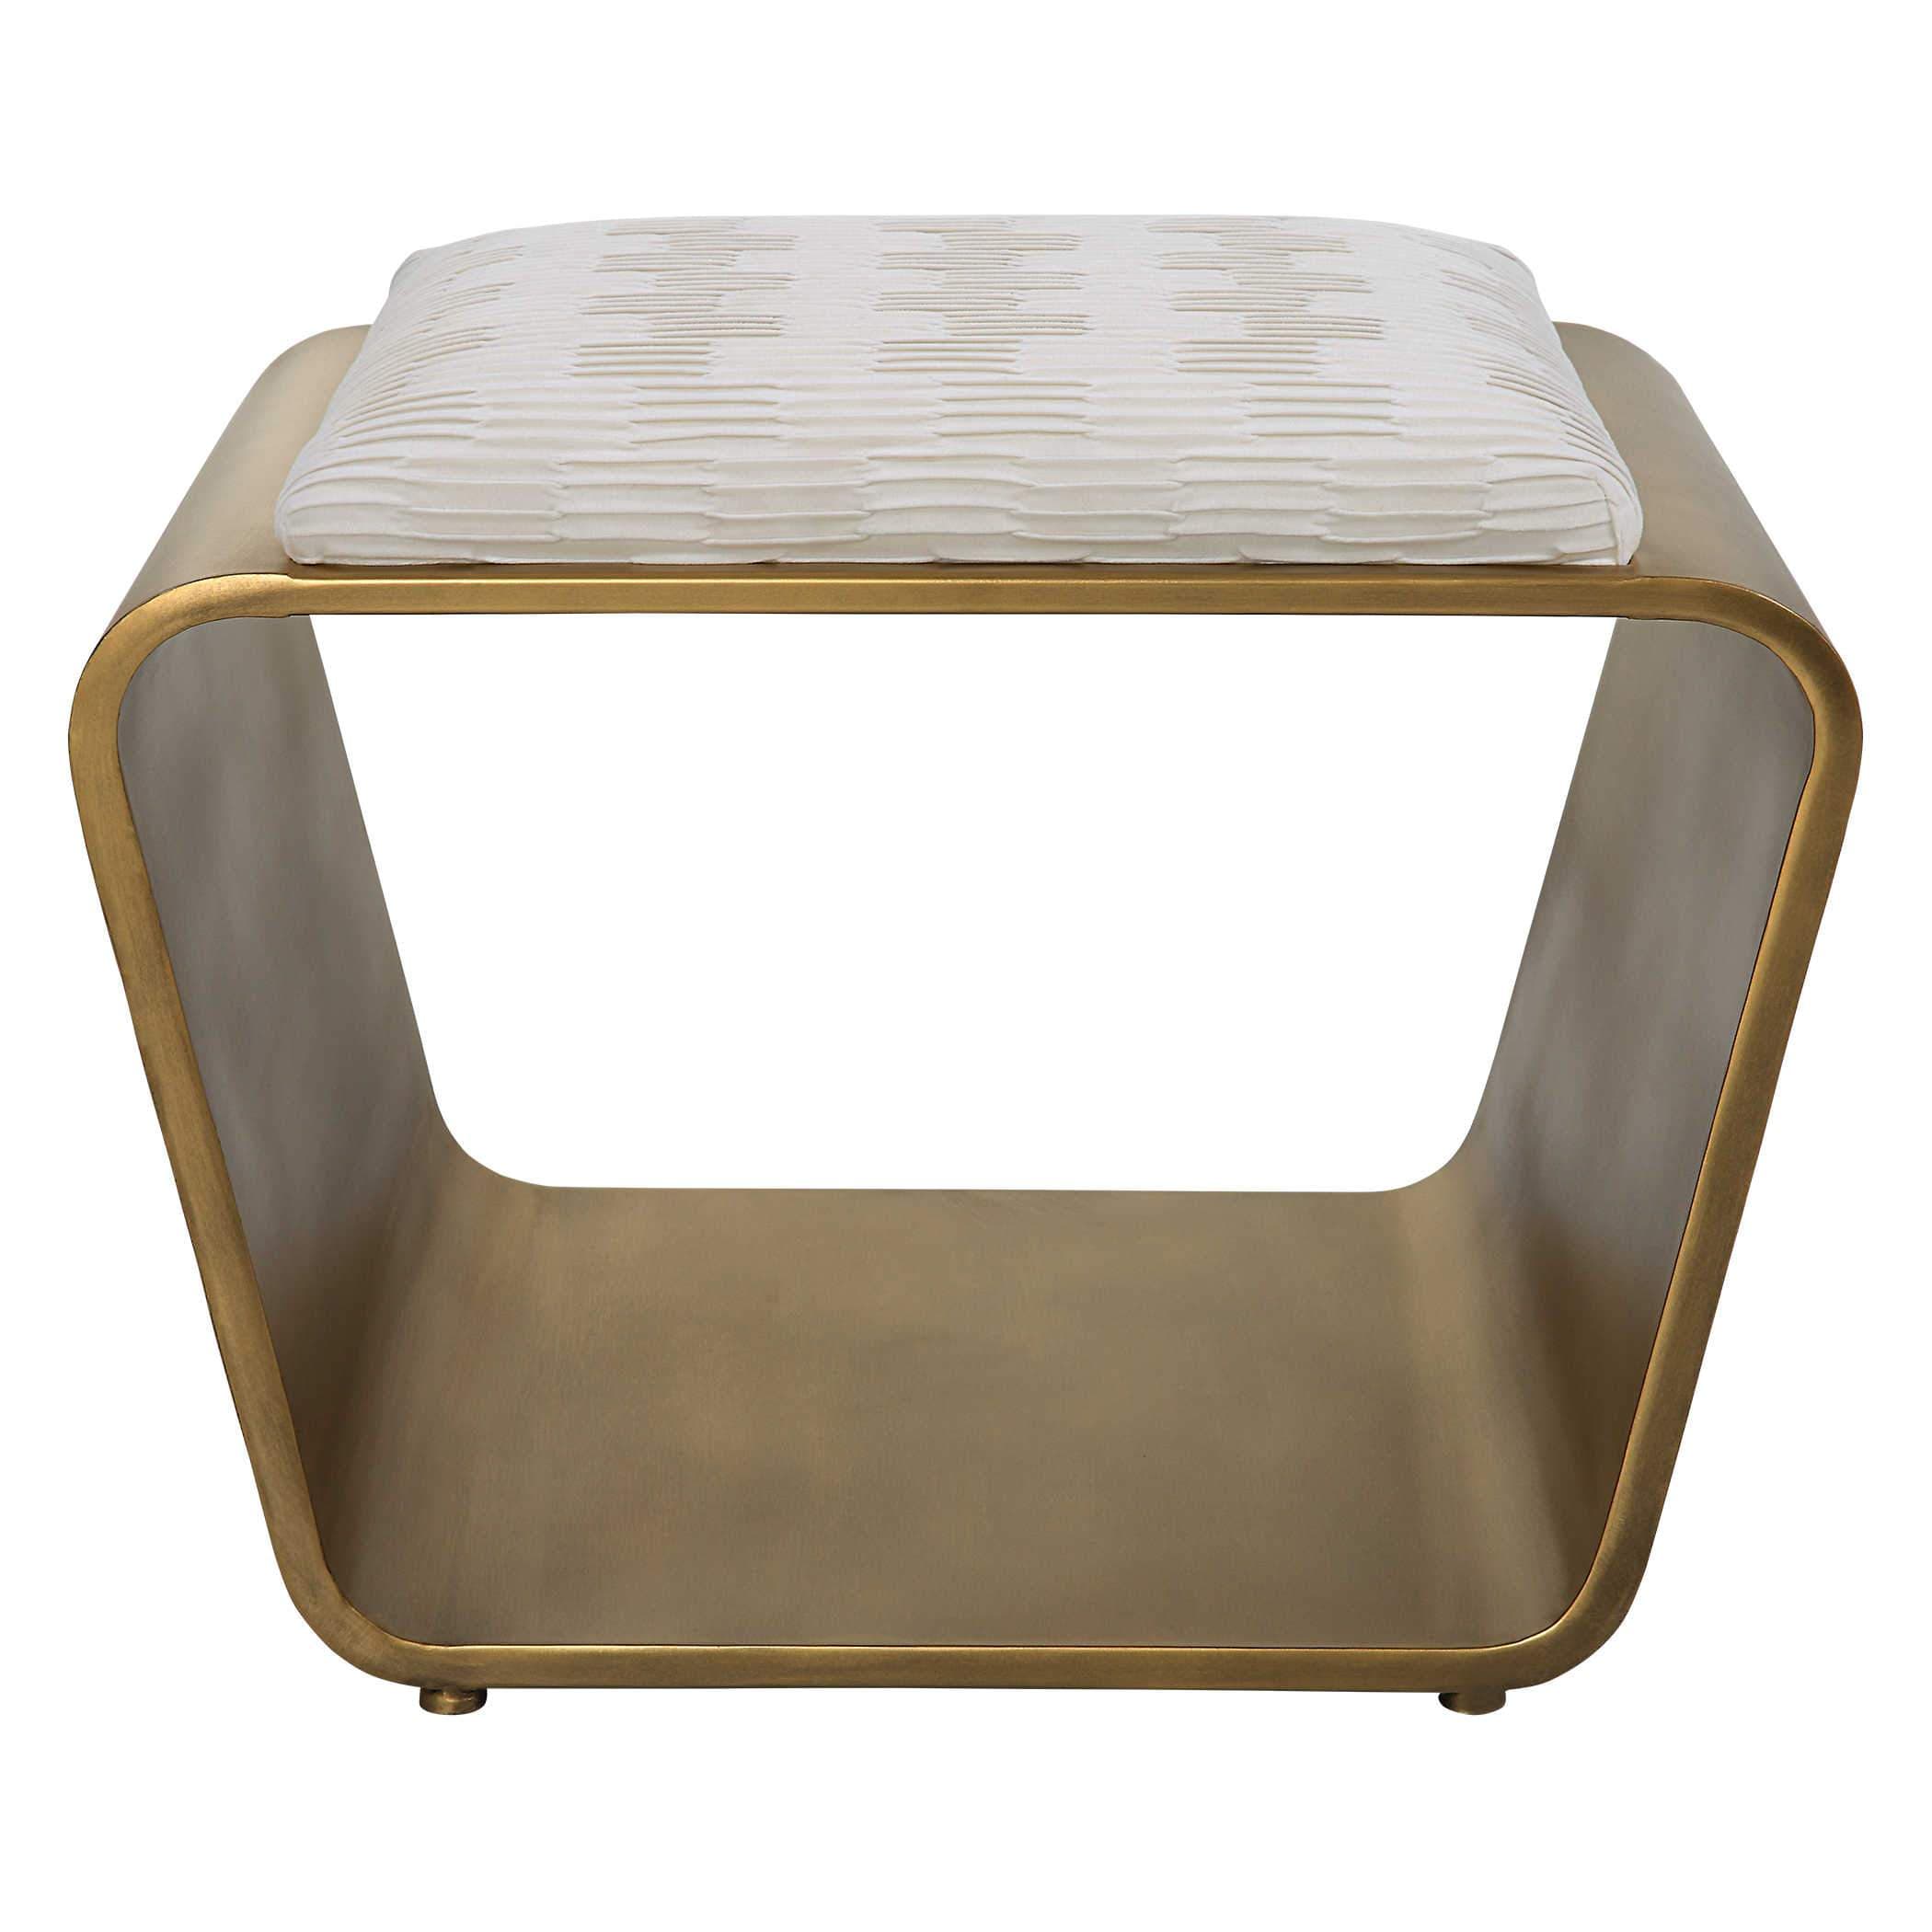 Hoop Small Gold Bench Uttermost